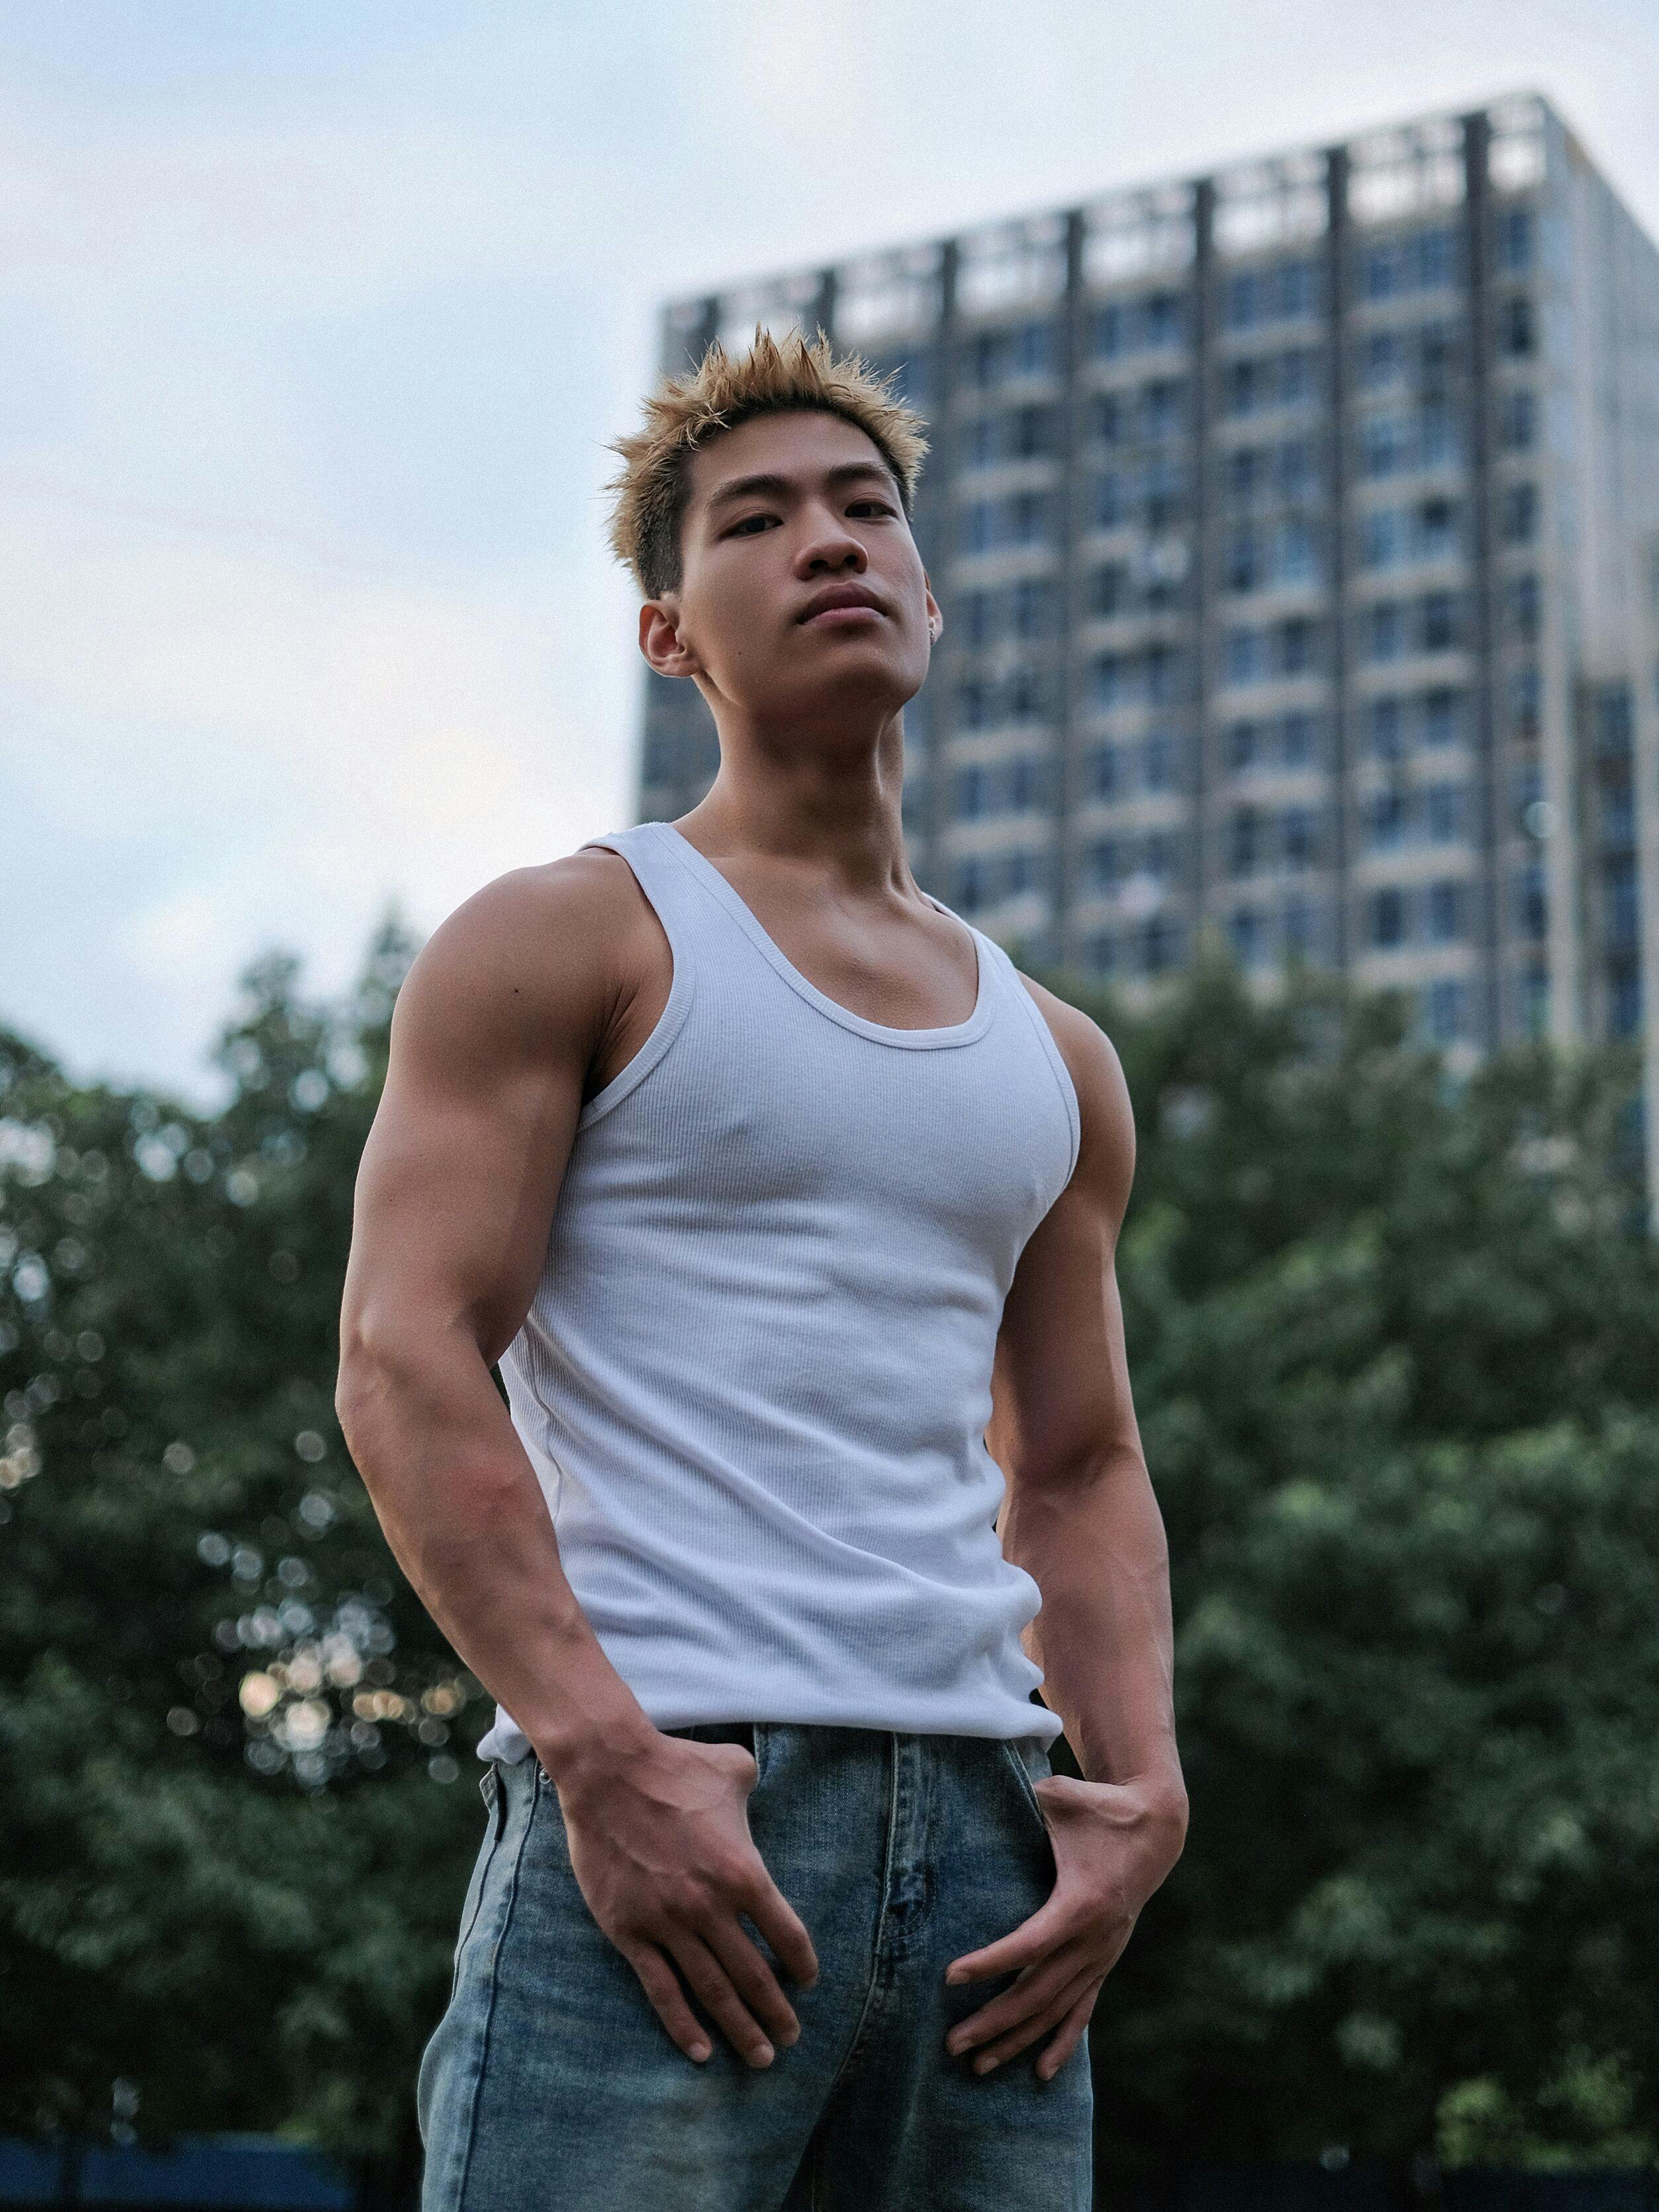 https://images.pexels.com/photos/19668369/pexels-photo-19668369/free-photo-of-young-athletic-man-in-a-tank-top.jpeg